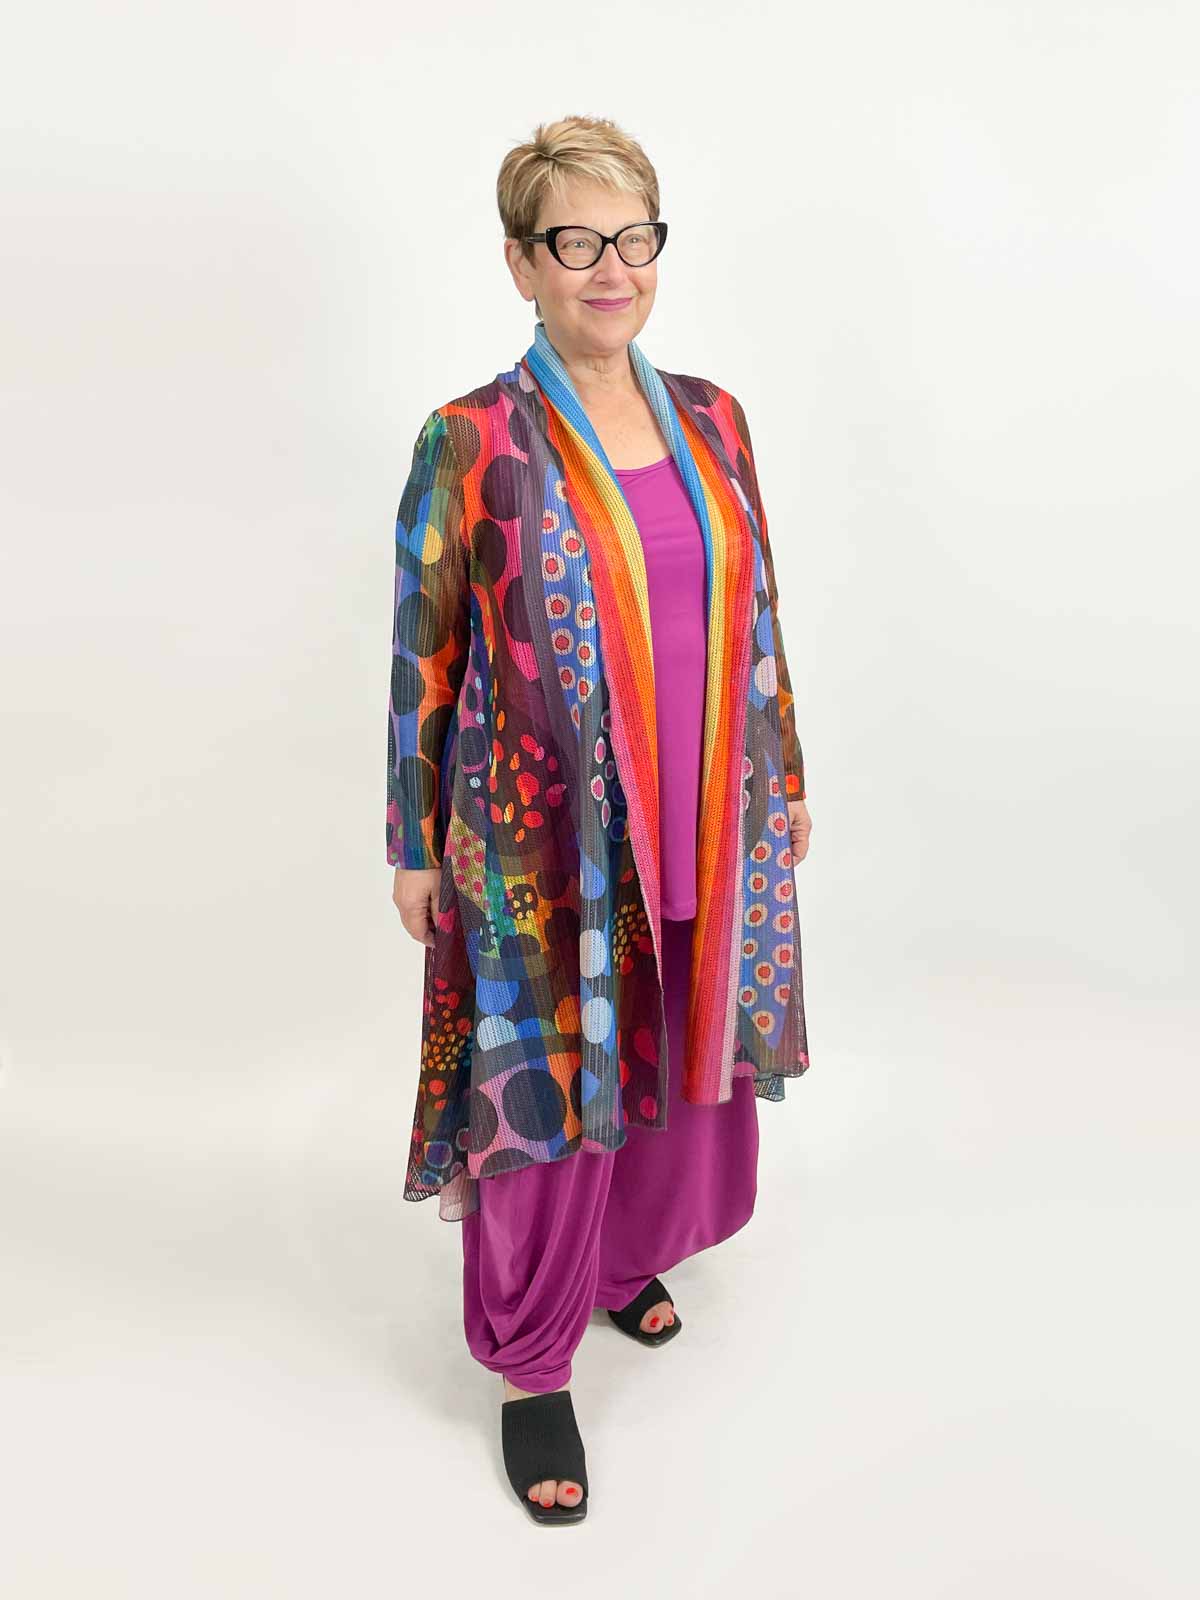 Kozan Limited Edition Molly Cardigan, Infinity - Statement Boutique